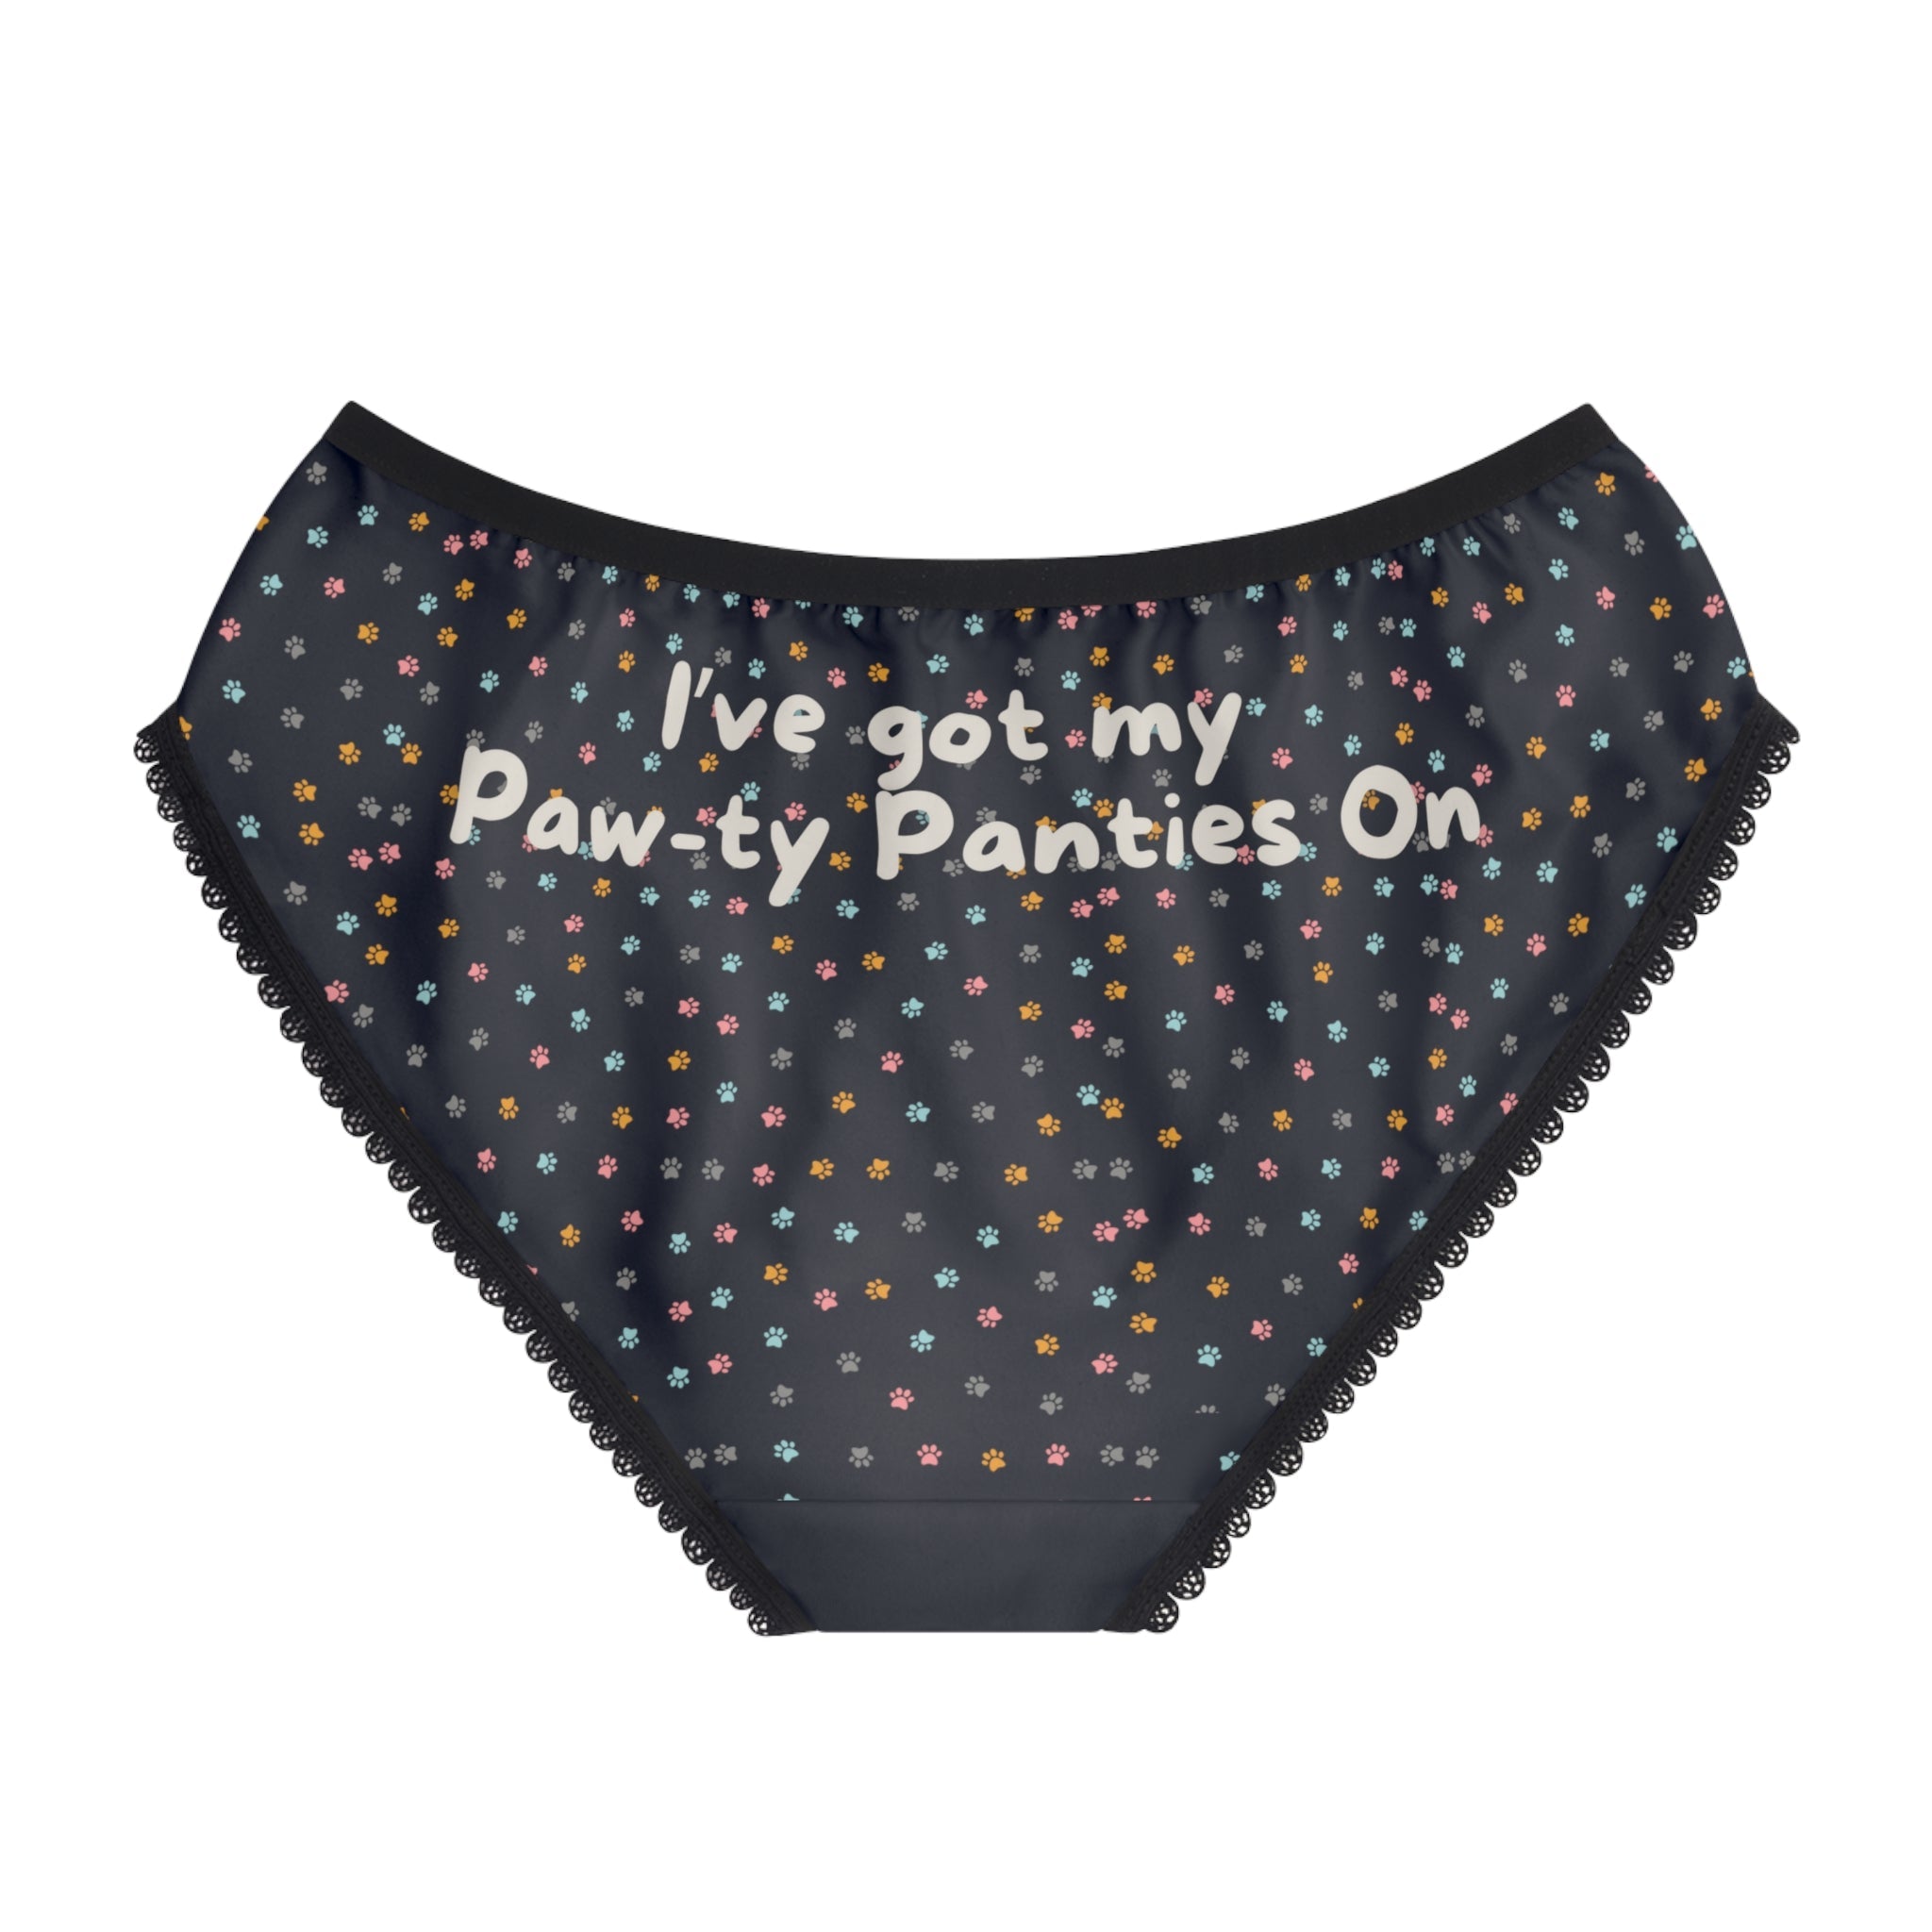 Paw - ty Panties - XS / Black stitching All Over Prints